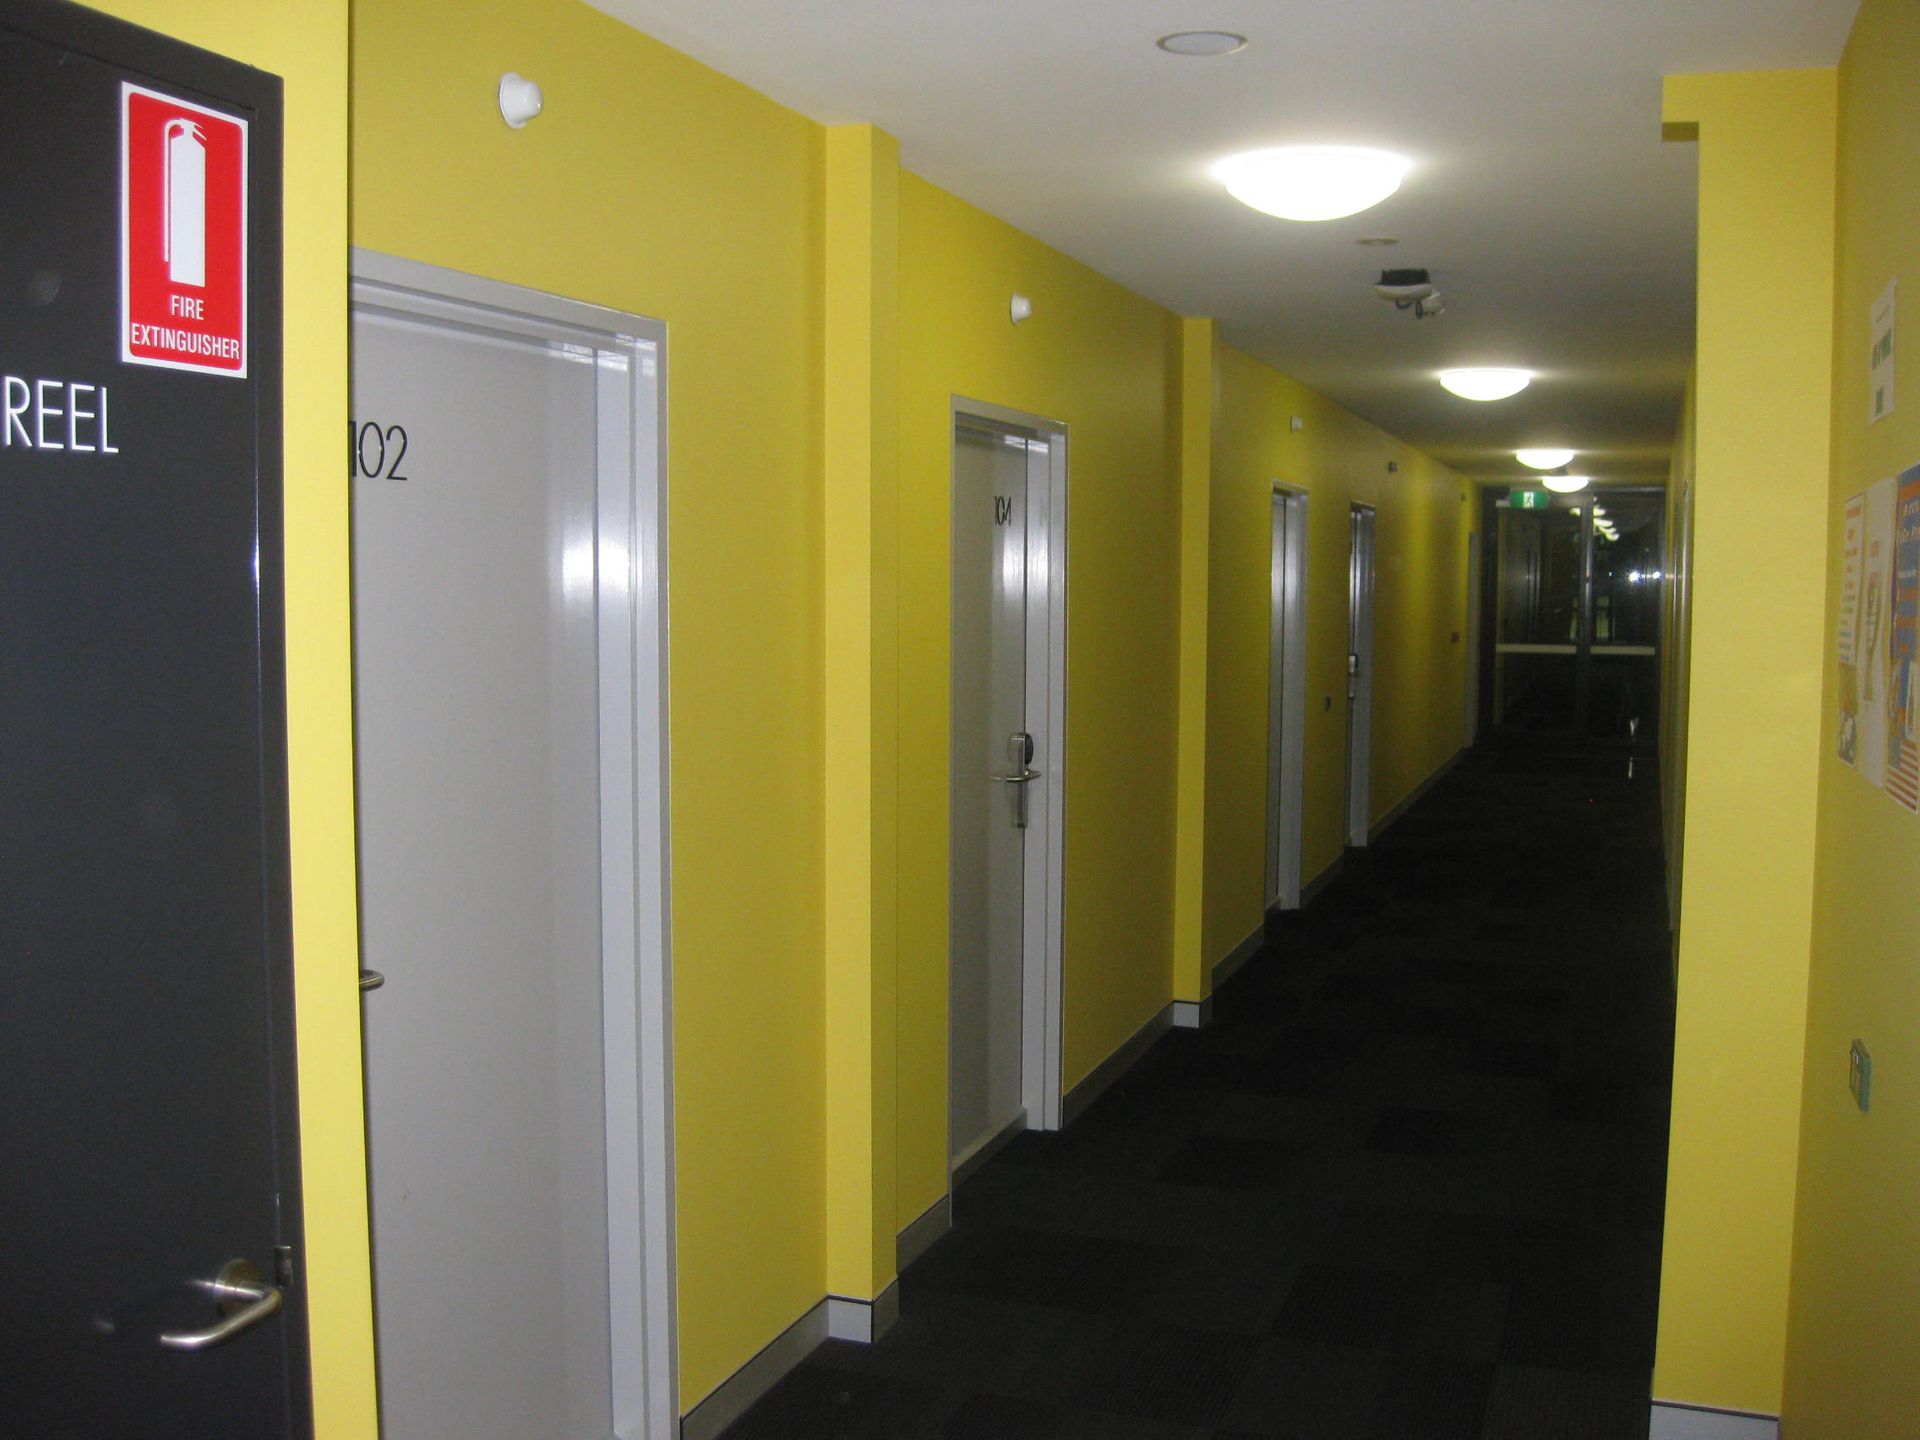 long corridor with bright yellow walls at wright college in armidale